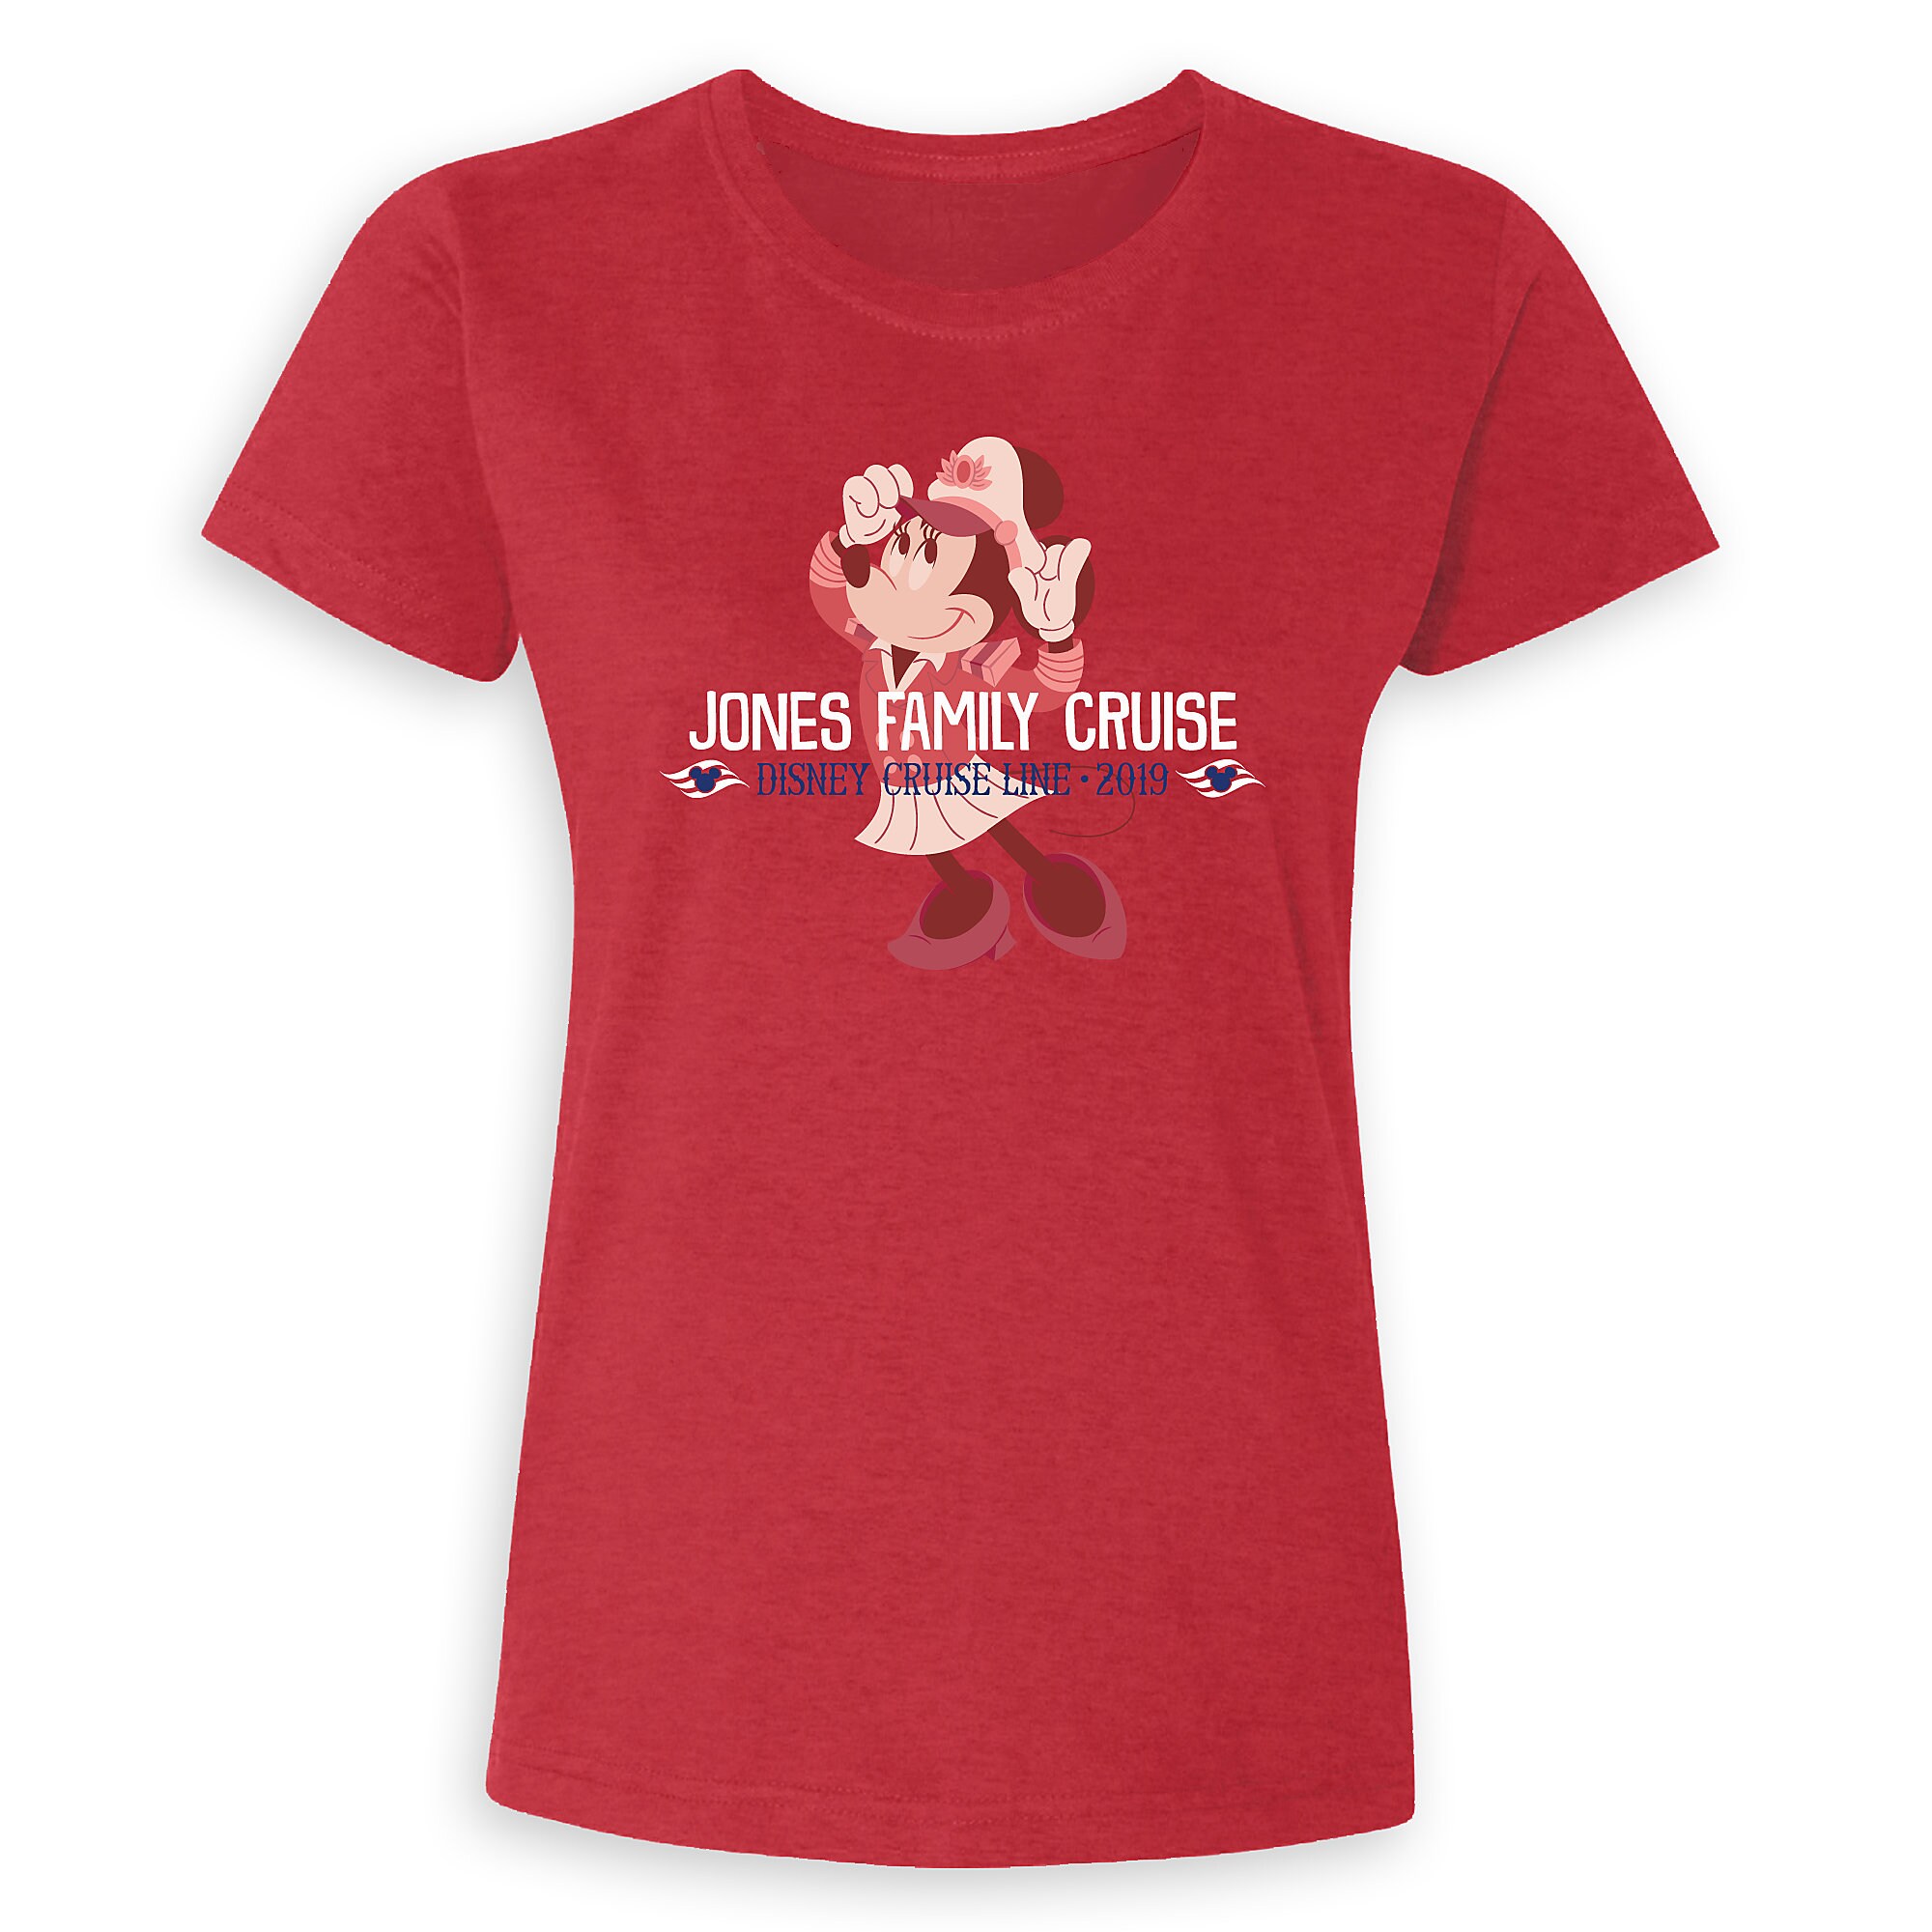 Ladies' Captain Minnie Mouse Disney Cruise Line Family Cruise 2019 T-Shirt - Customized